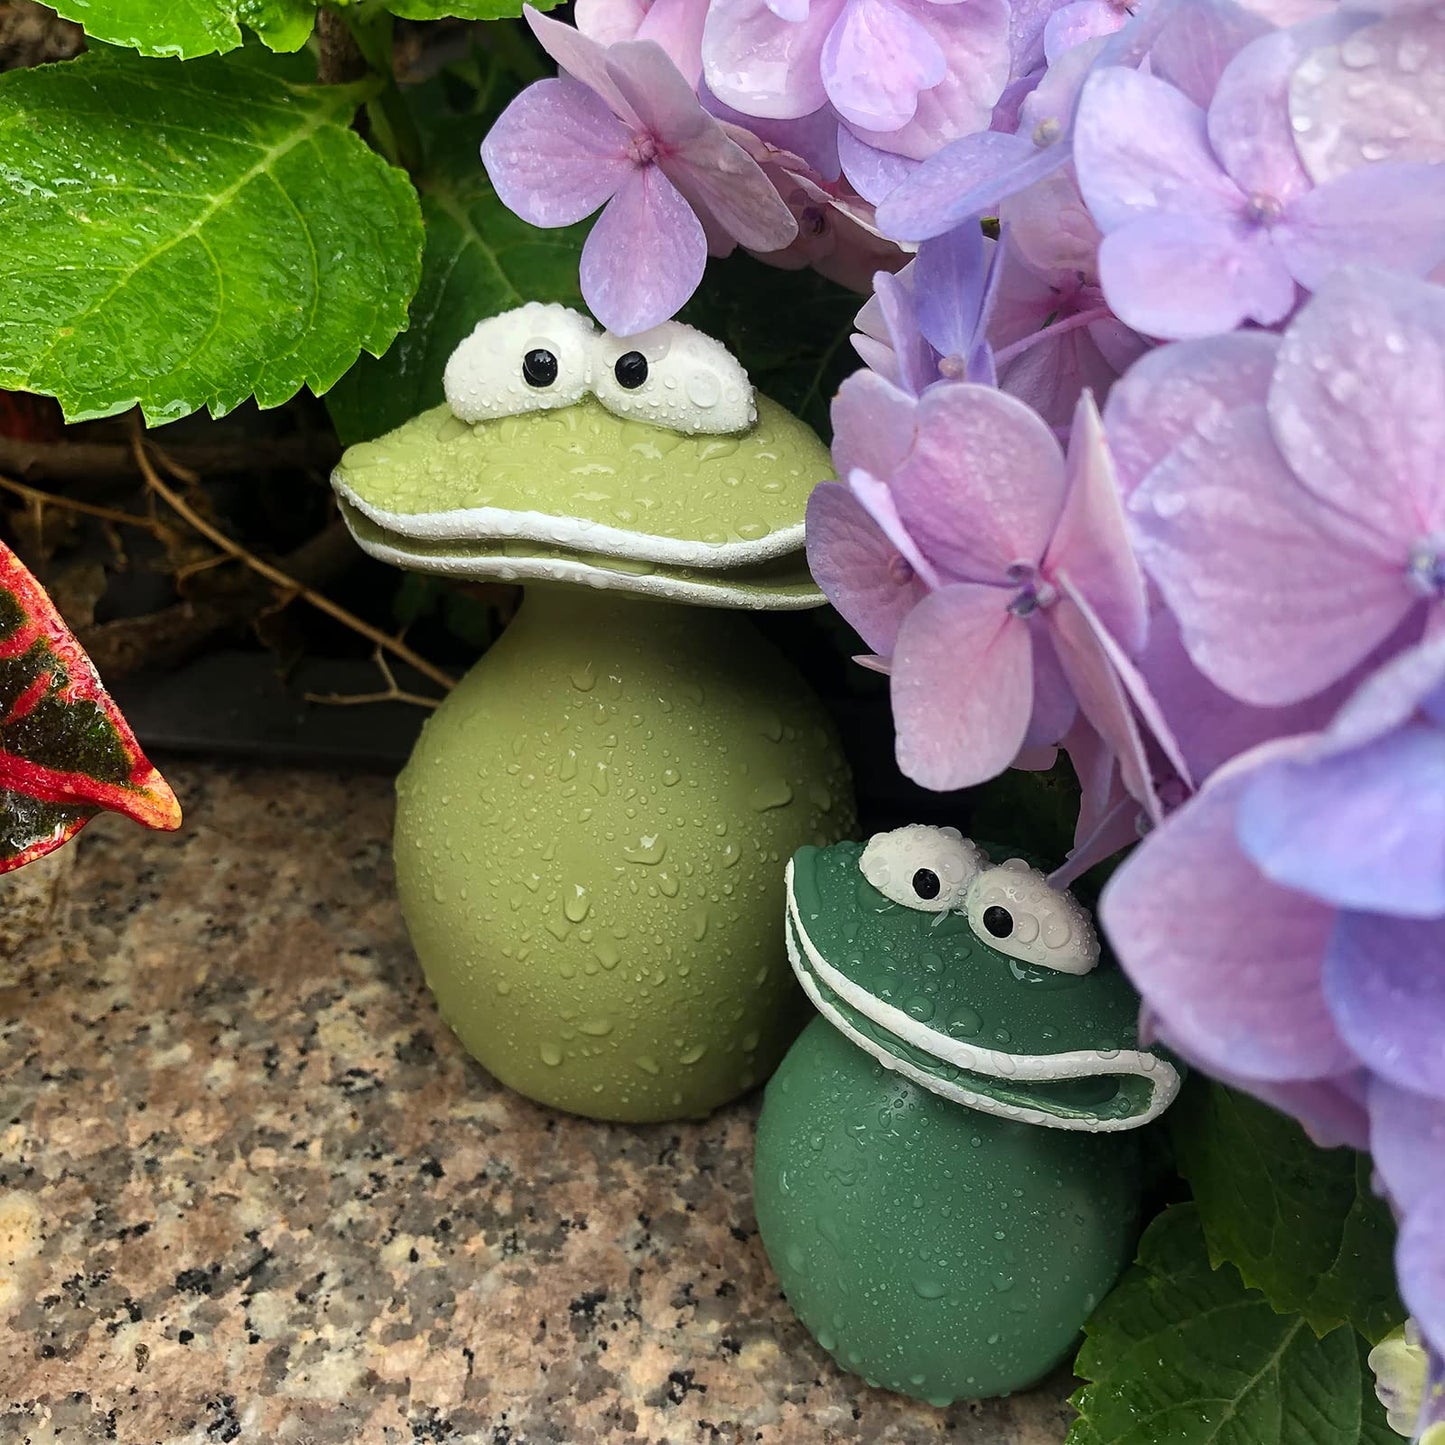 Frog Statues for Garden Big Mouth Frog Statues Waterproof Handmade,Outdoor Frog Decoration Garden Frog Statues Suitable for Decorating Courtyards, Balconies, and Lawns - Animal Gardening Gifts